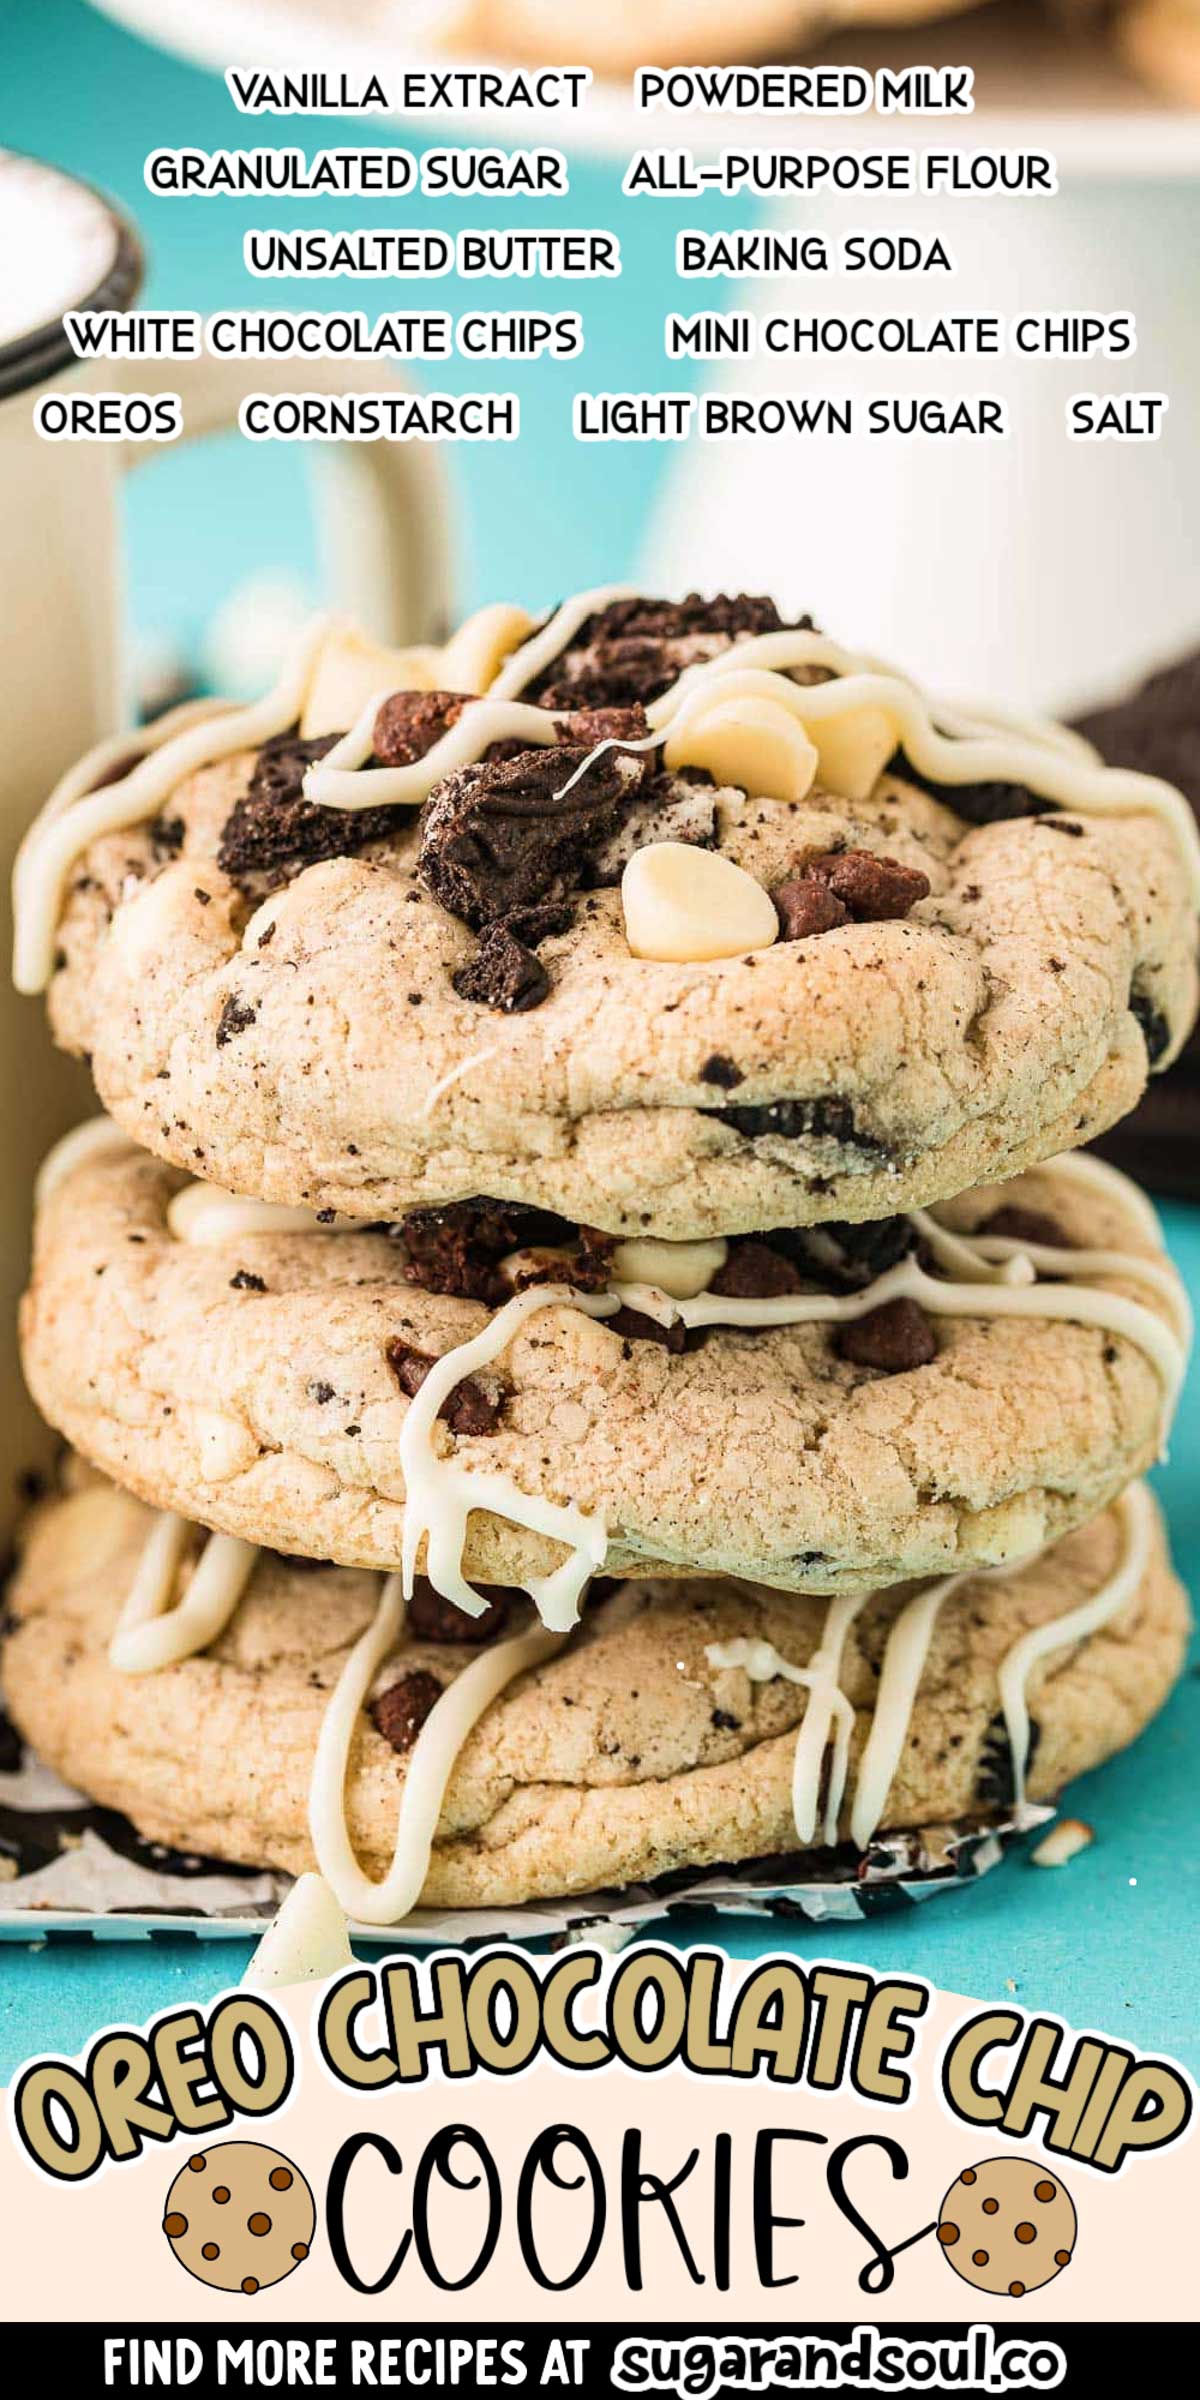 Chocolate Chip Oreo Cookies are a mash-up of Oreos and pantry staple ingredients to create delicious cookies that the whole family will love! Each batch takes just 10 minutes to bake! via @sugarandsoulco